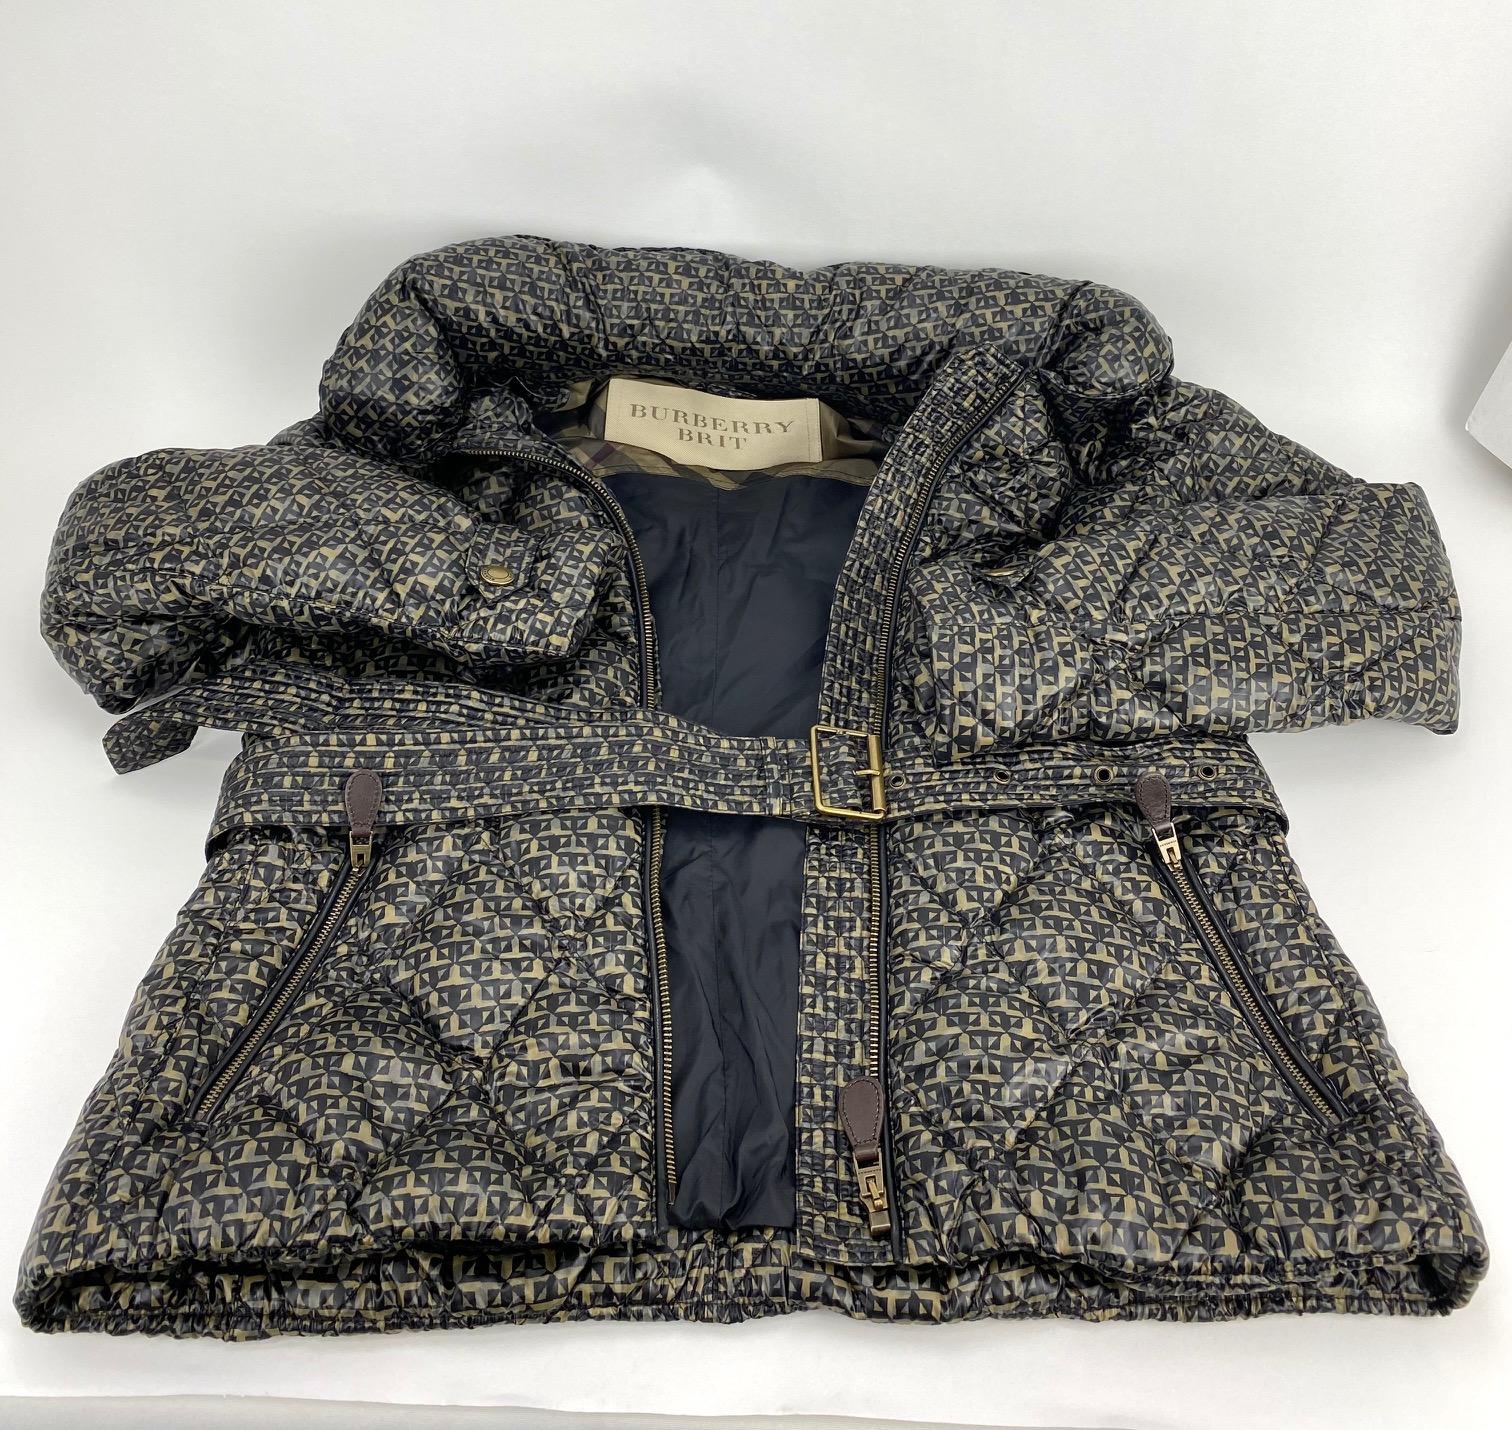 Pre-Owned 100% Authentic
Burberry Brit Gold and Black thin Down Jacket
RATING: A..excellent, near mint, only
slight signs of wear
SIZE: XL (Runs small more like a large)
MATERIAL: Outer :100% polyamide (nylon)
LINING: upper 100% polyester lower 100%